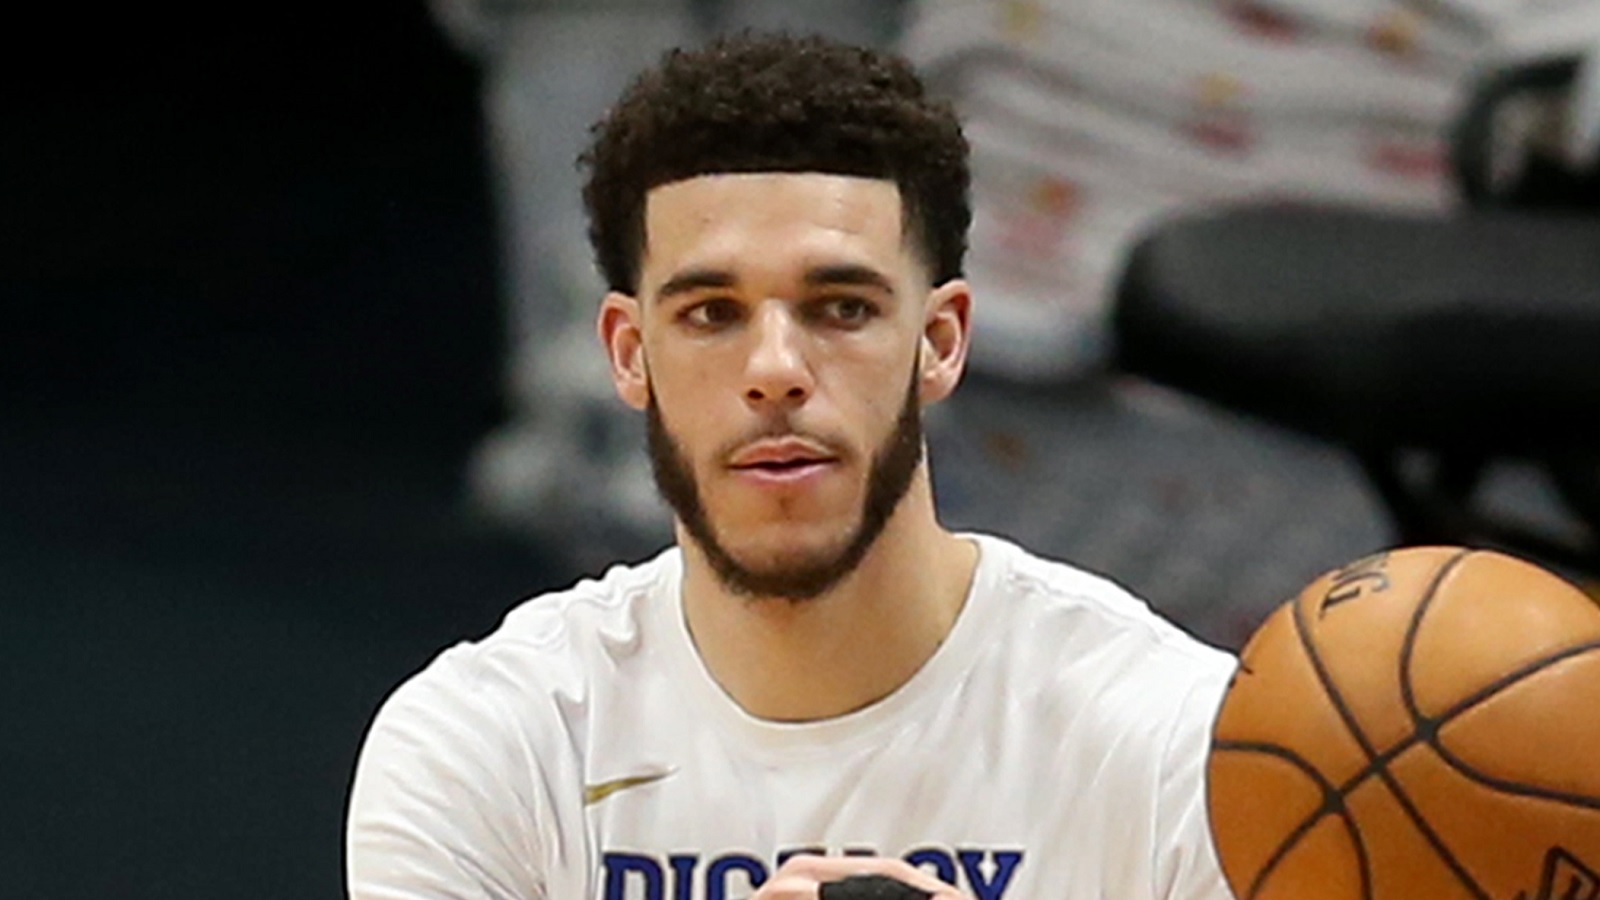 It should be a movie': Lonzo Ball-led Chino Hills team could have two more  top-10 NBA picks this fall, Pelicans